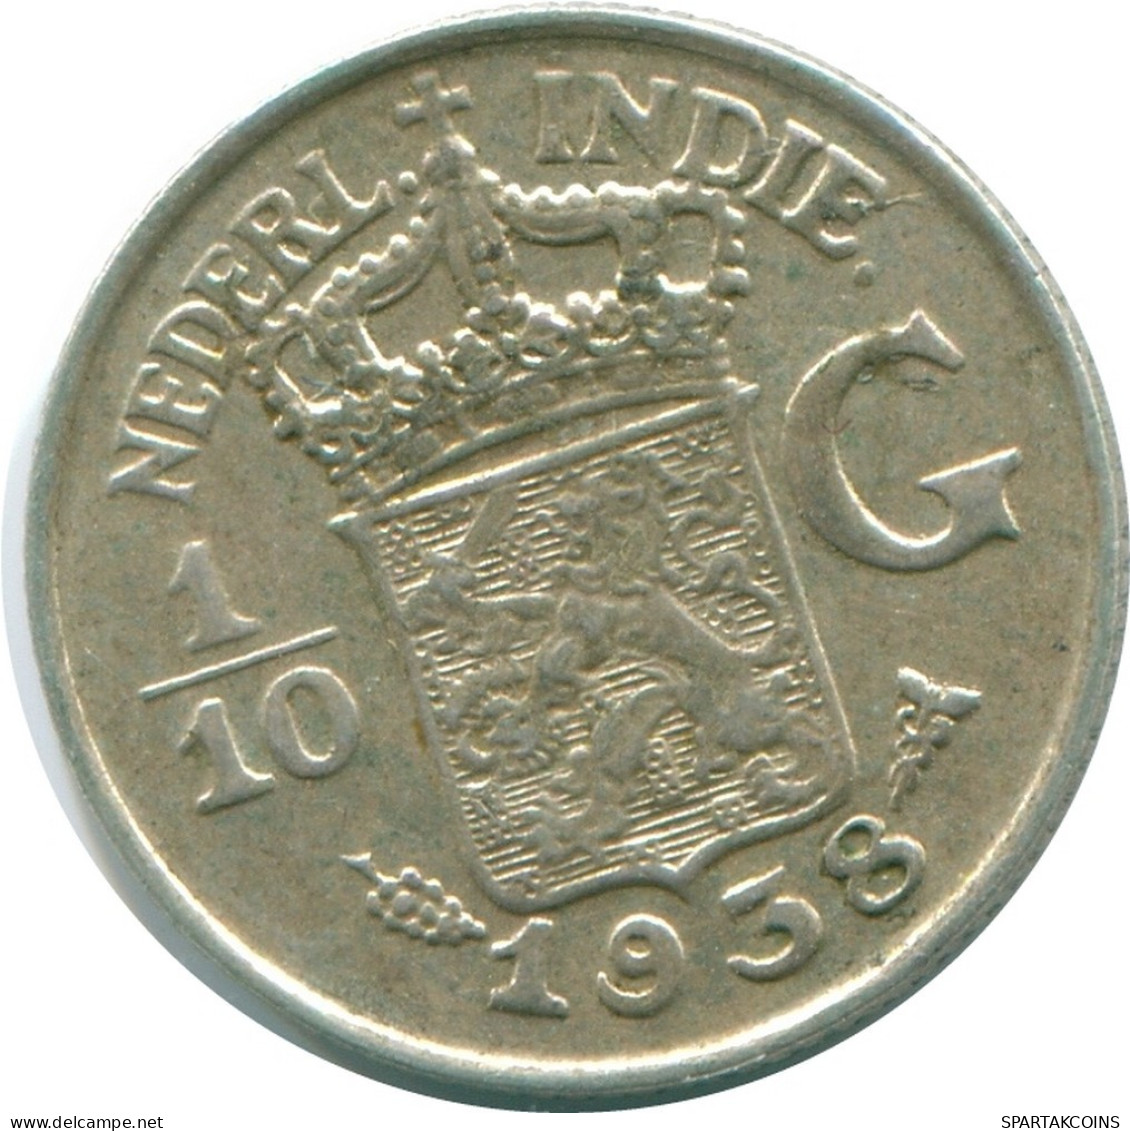 1/10 GULDEN 1938 NETHERLANDS EAST INDIES SILVER Colonial Coin #NL13495.3.U.A - Dutch East Indies